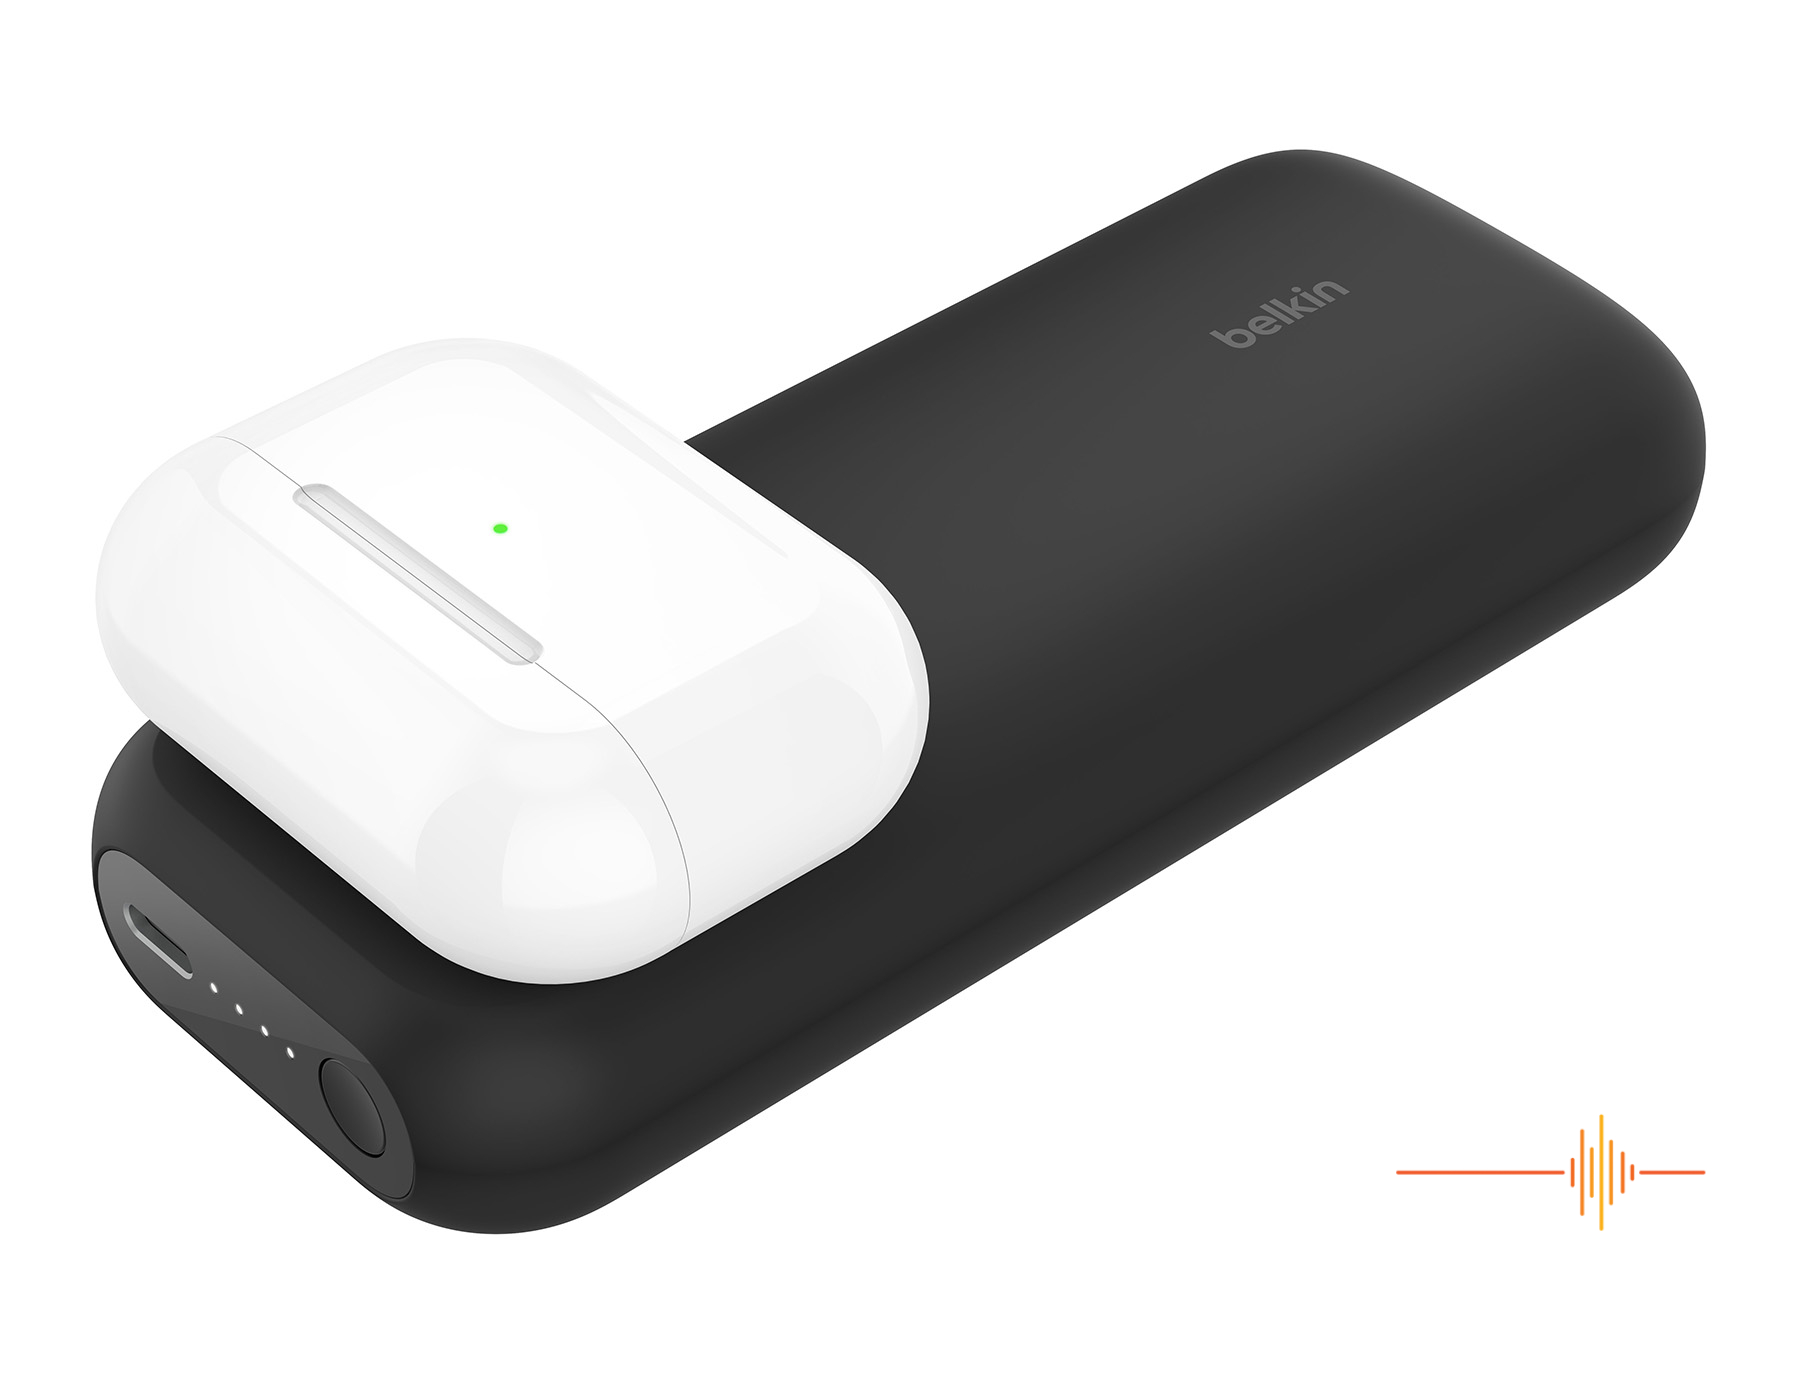 Belkin's new power bank is a godsend for Apple Watch users going on holiday  (Updated) 